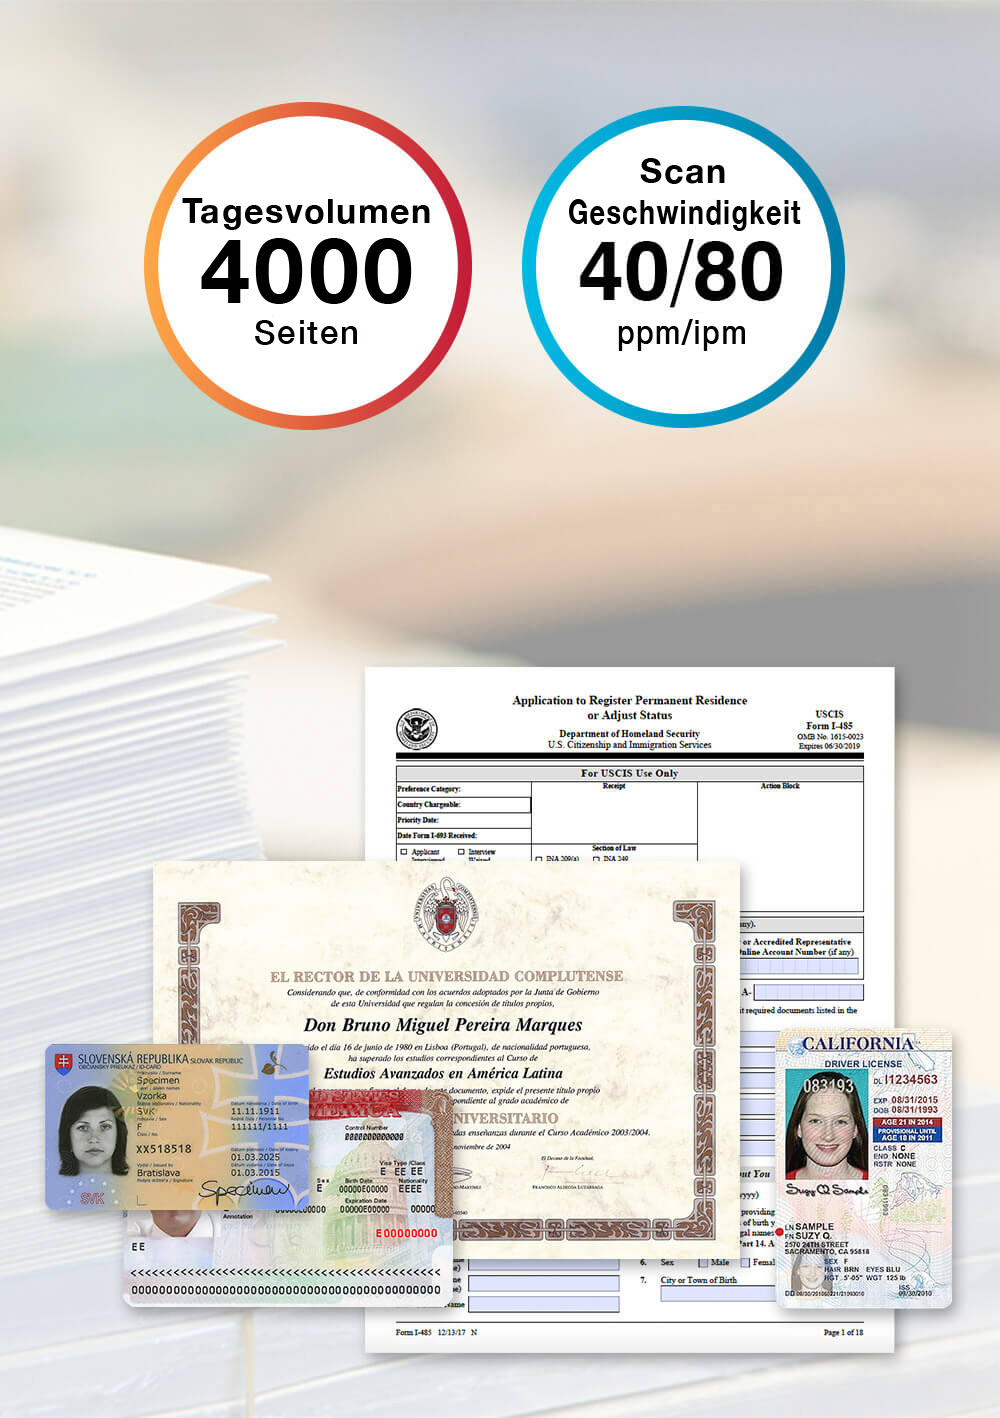 scan a batch of document and ID card at the same time